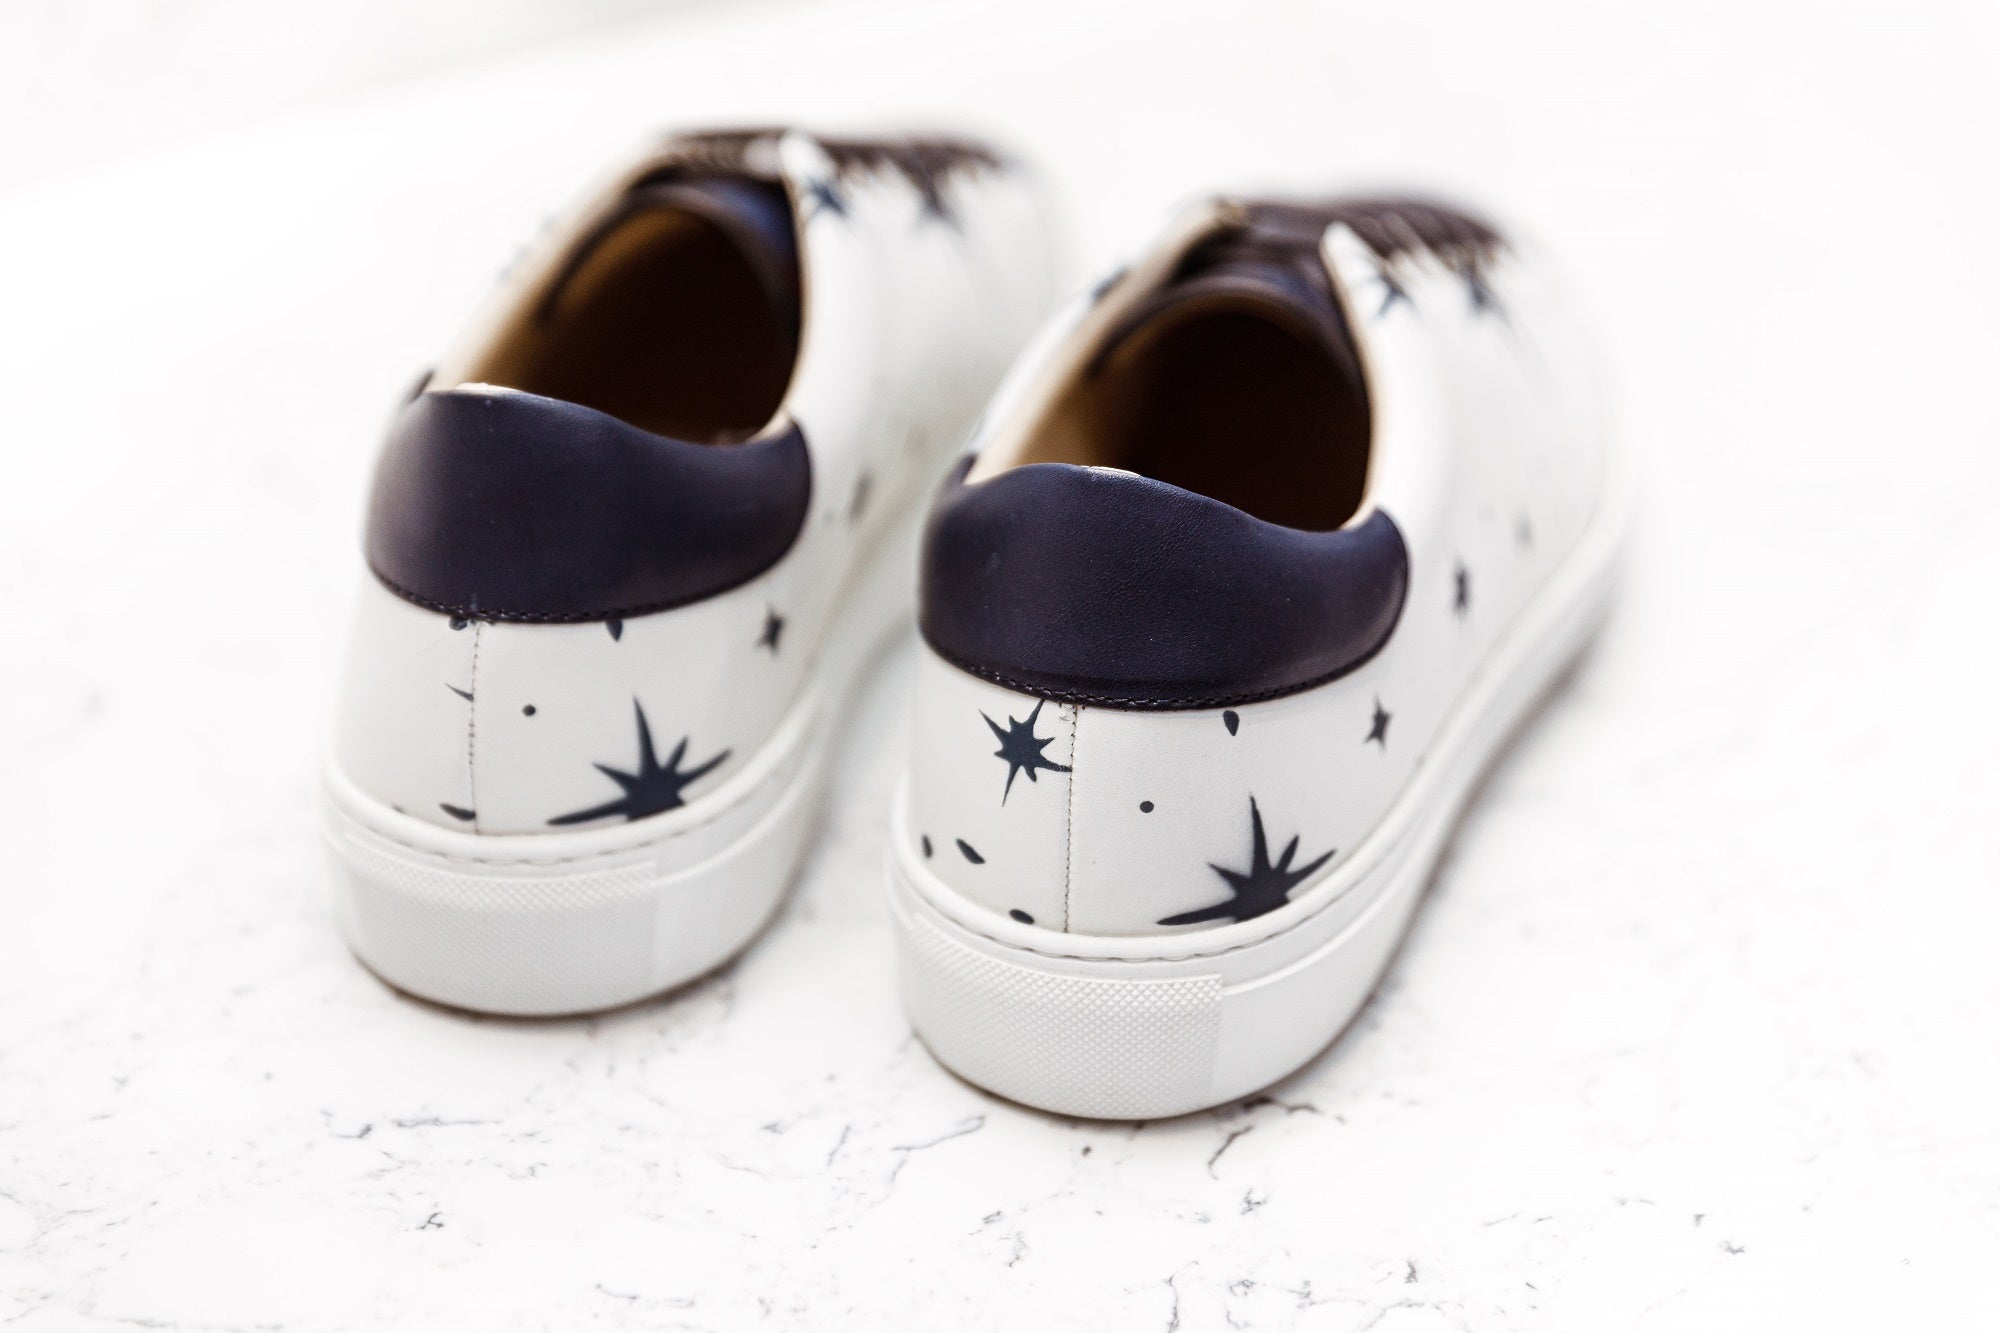 The Star - Sneaker I - Made To Order by Urbbana